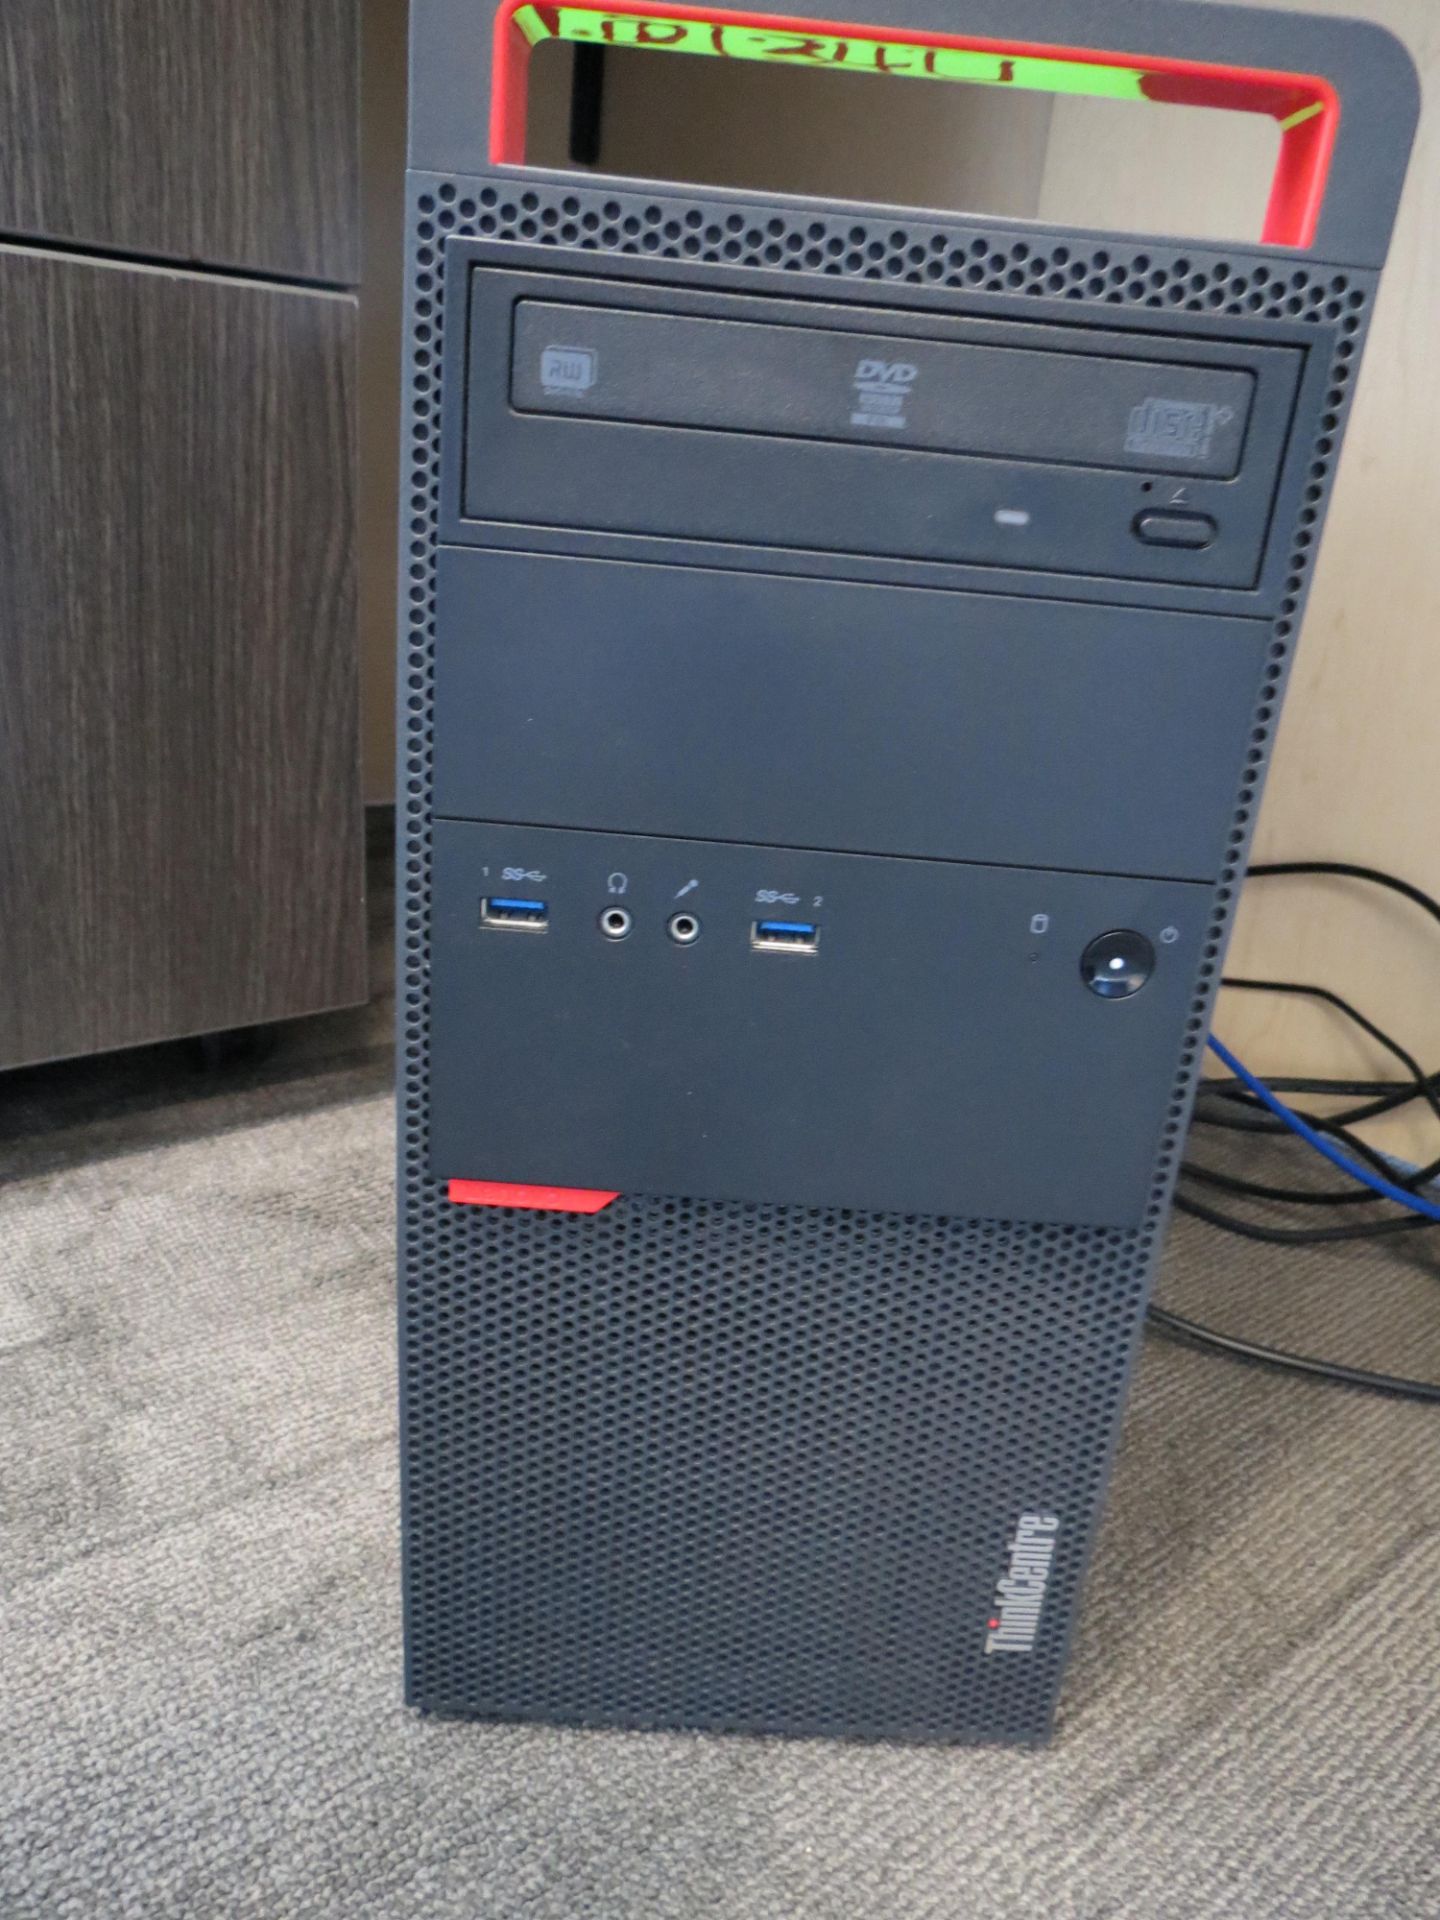 LENOVO THINKCENTRE DESKTOP /W DUAL MONITORS, KEYBOARD (SUBJECT TO CONFIRMATION) - Image 3 of 3